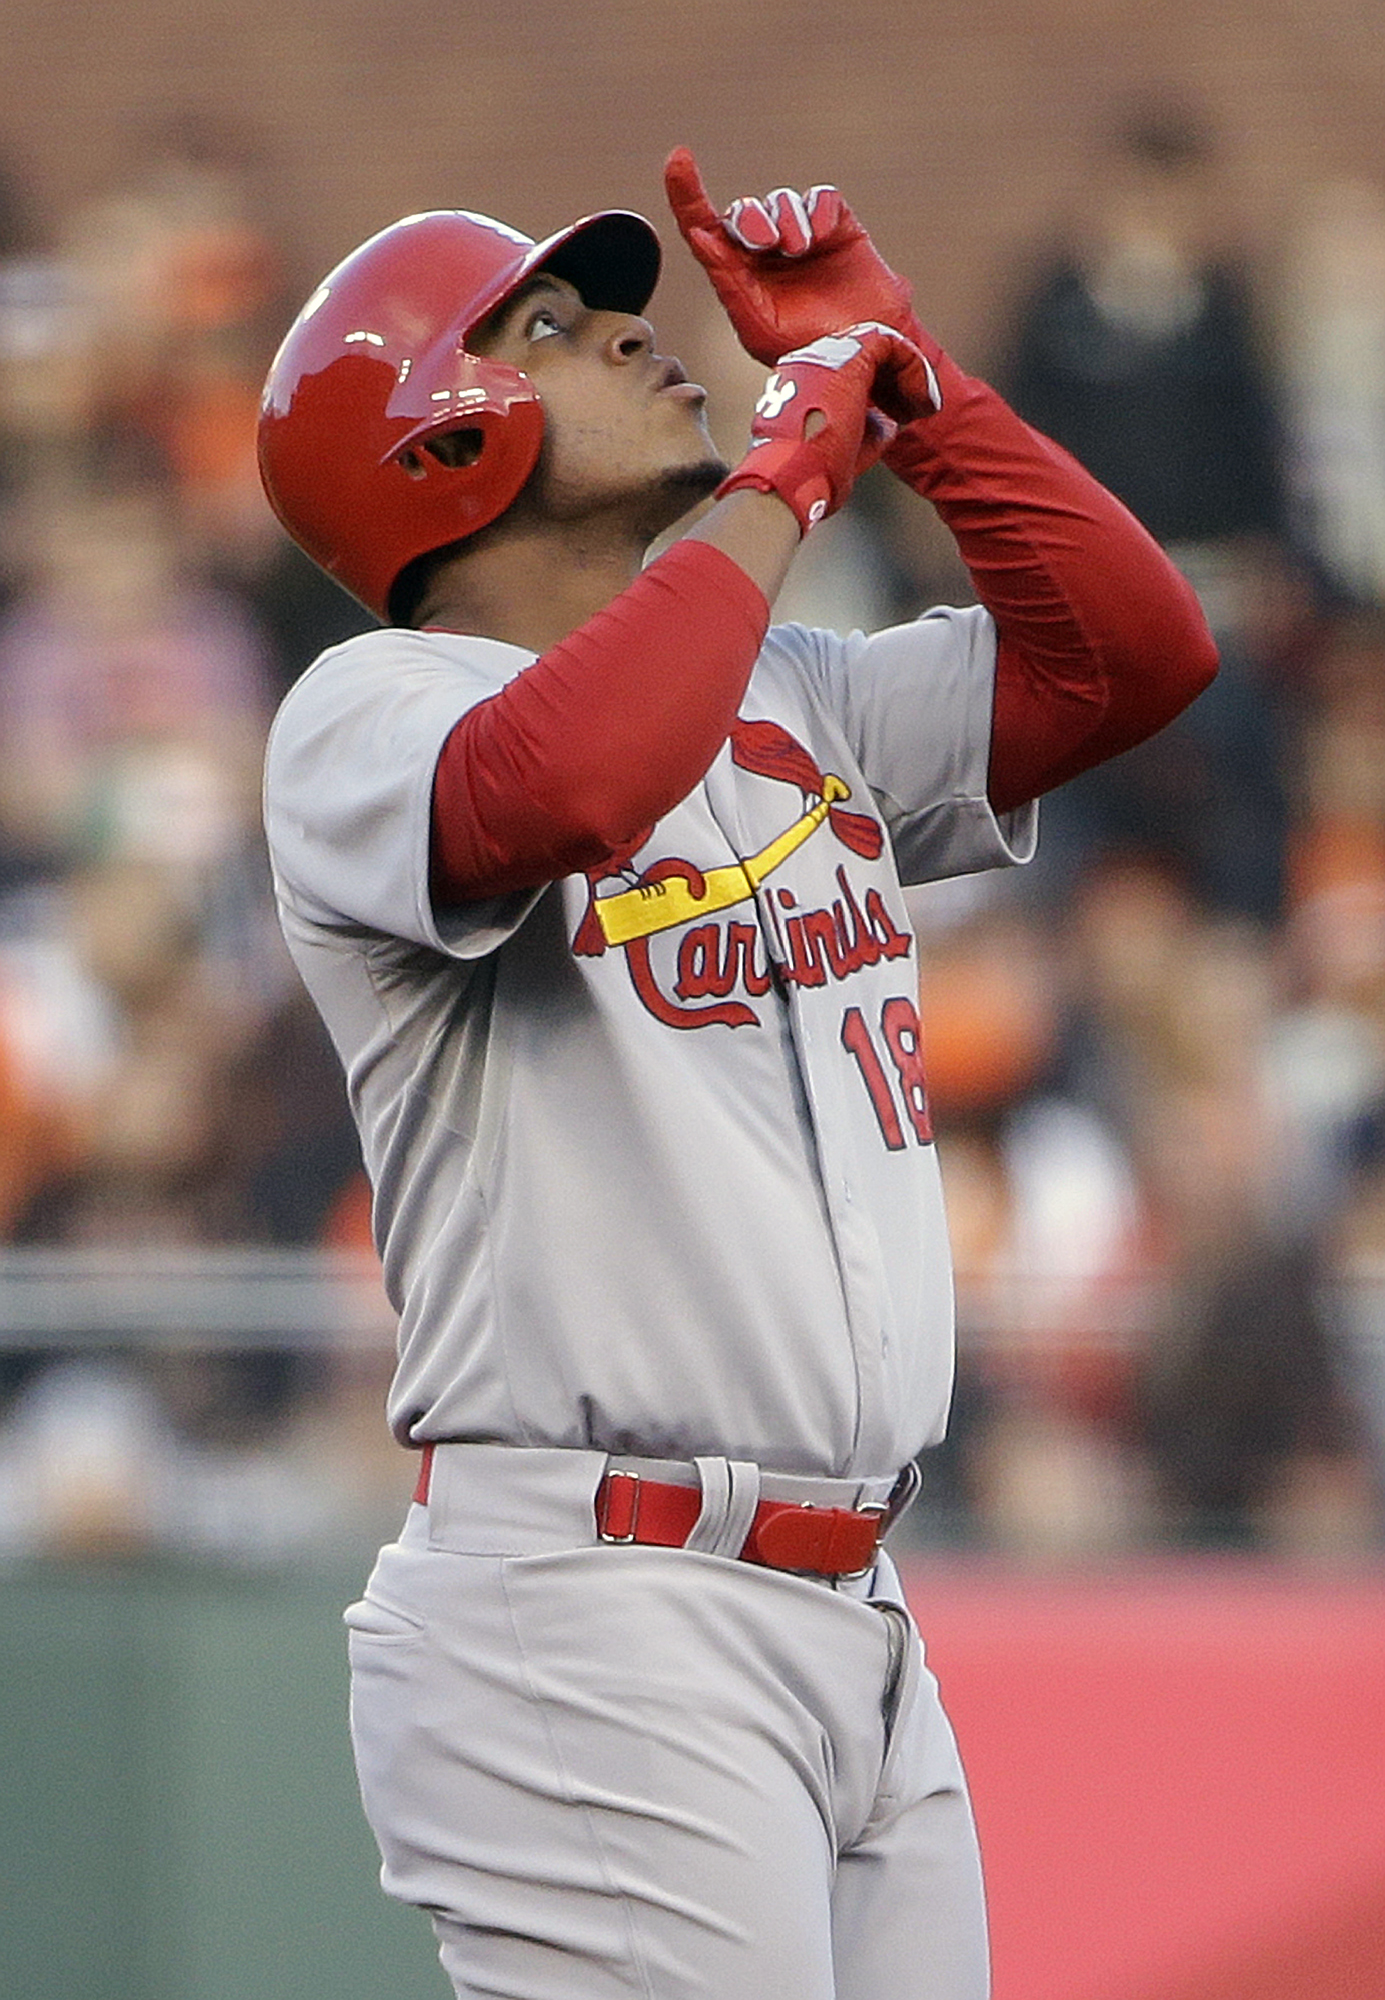 This July 2, 2014 file photo shows St. Louis Cardinals' Oscar Taveras at second base after doubling to right field in the third inning of a baseball game against the San Francisco Giants in San Francisco.